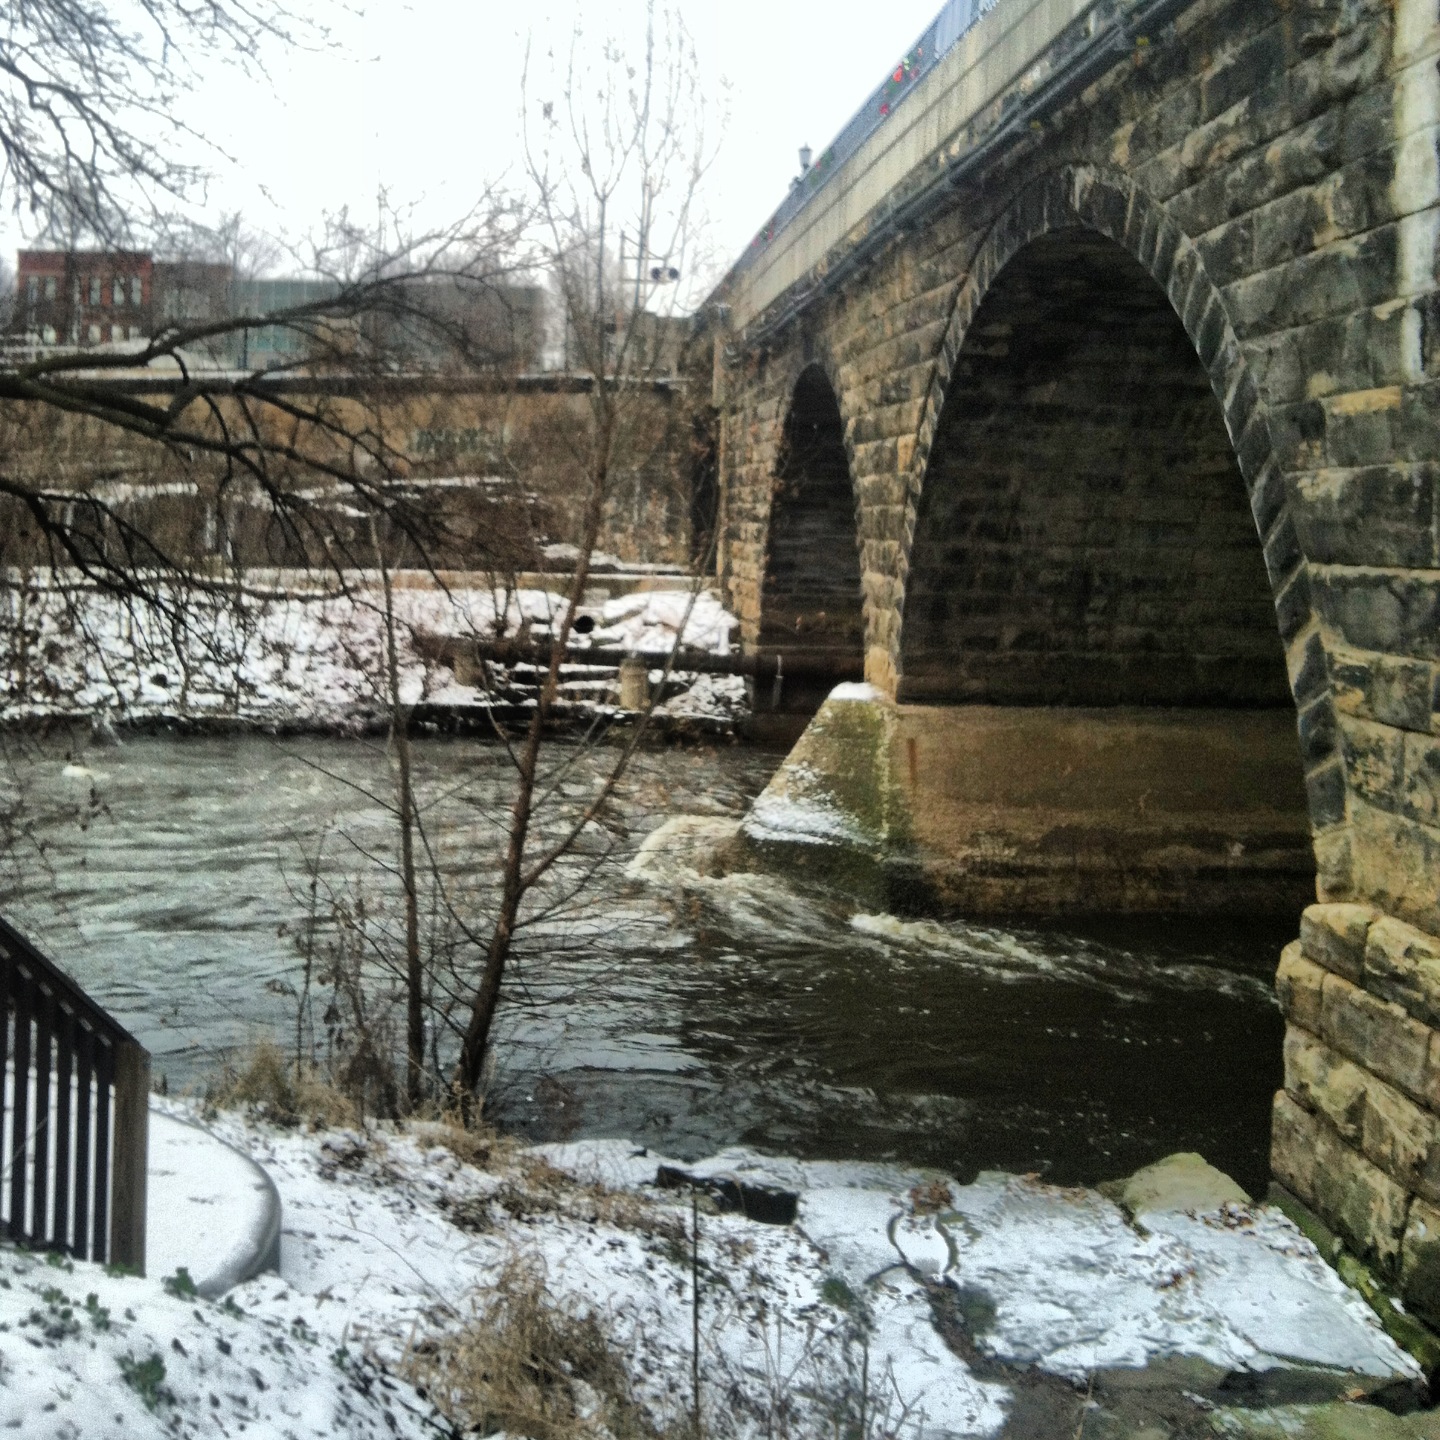 The Kent, Ohio bridge is surrounded by snow in winter.